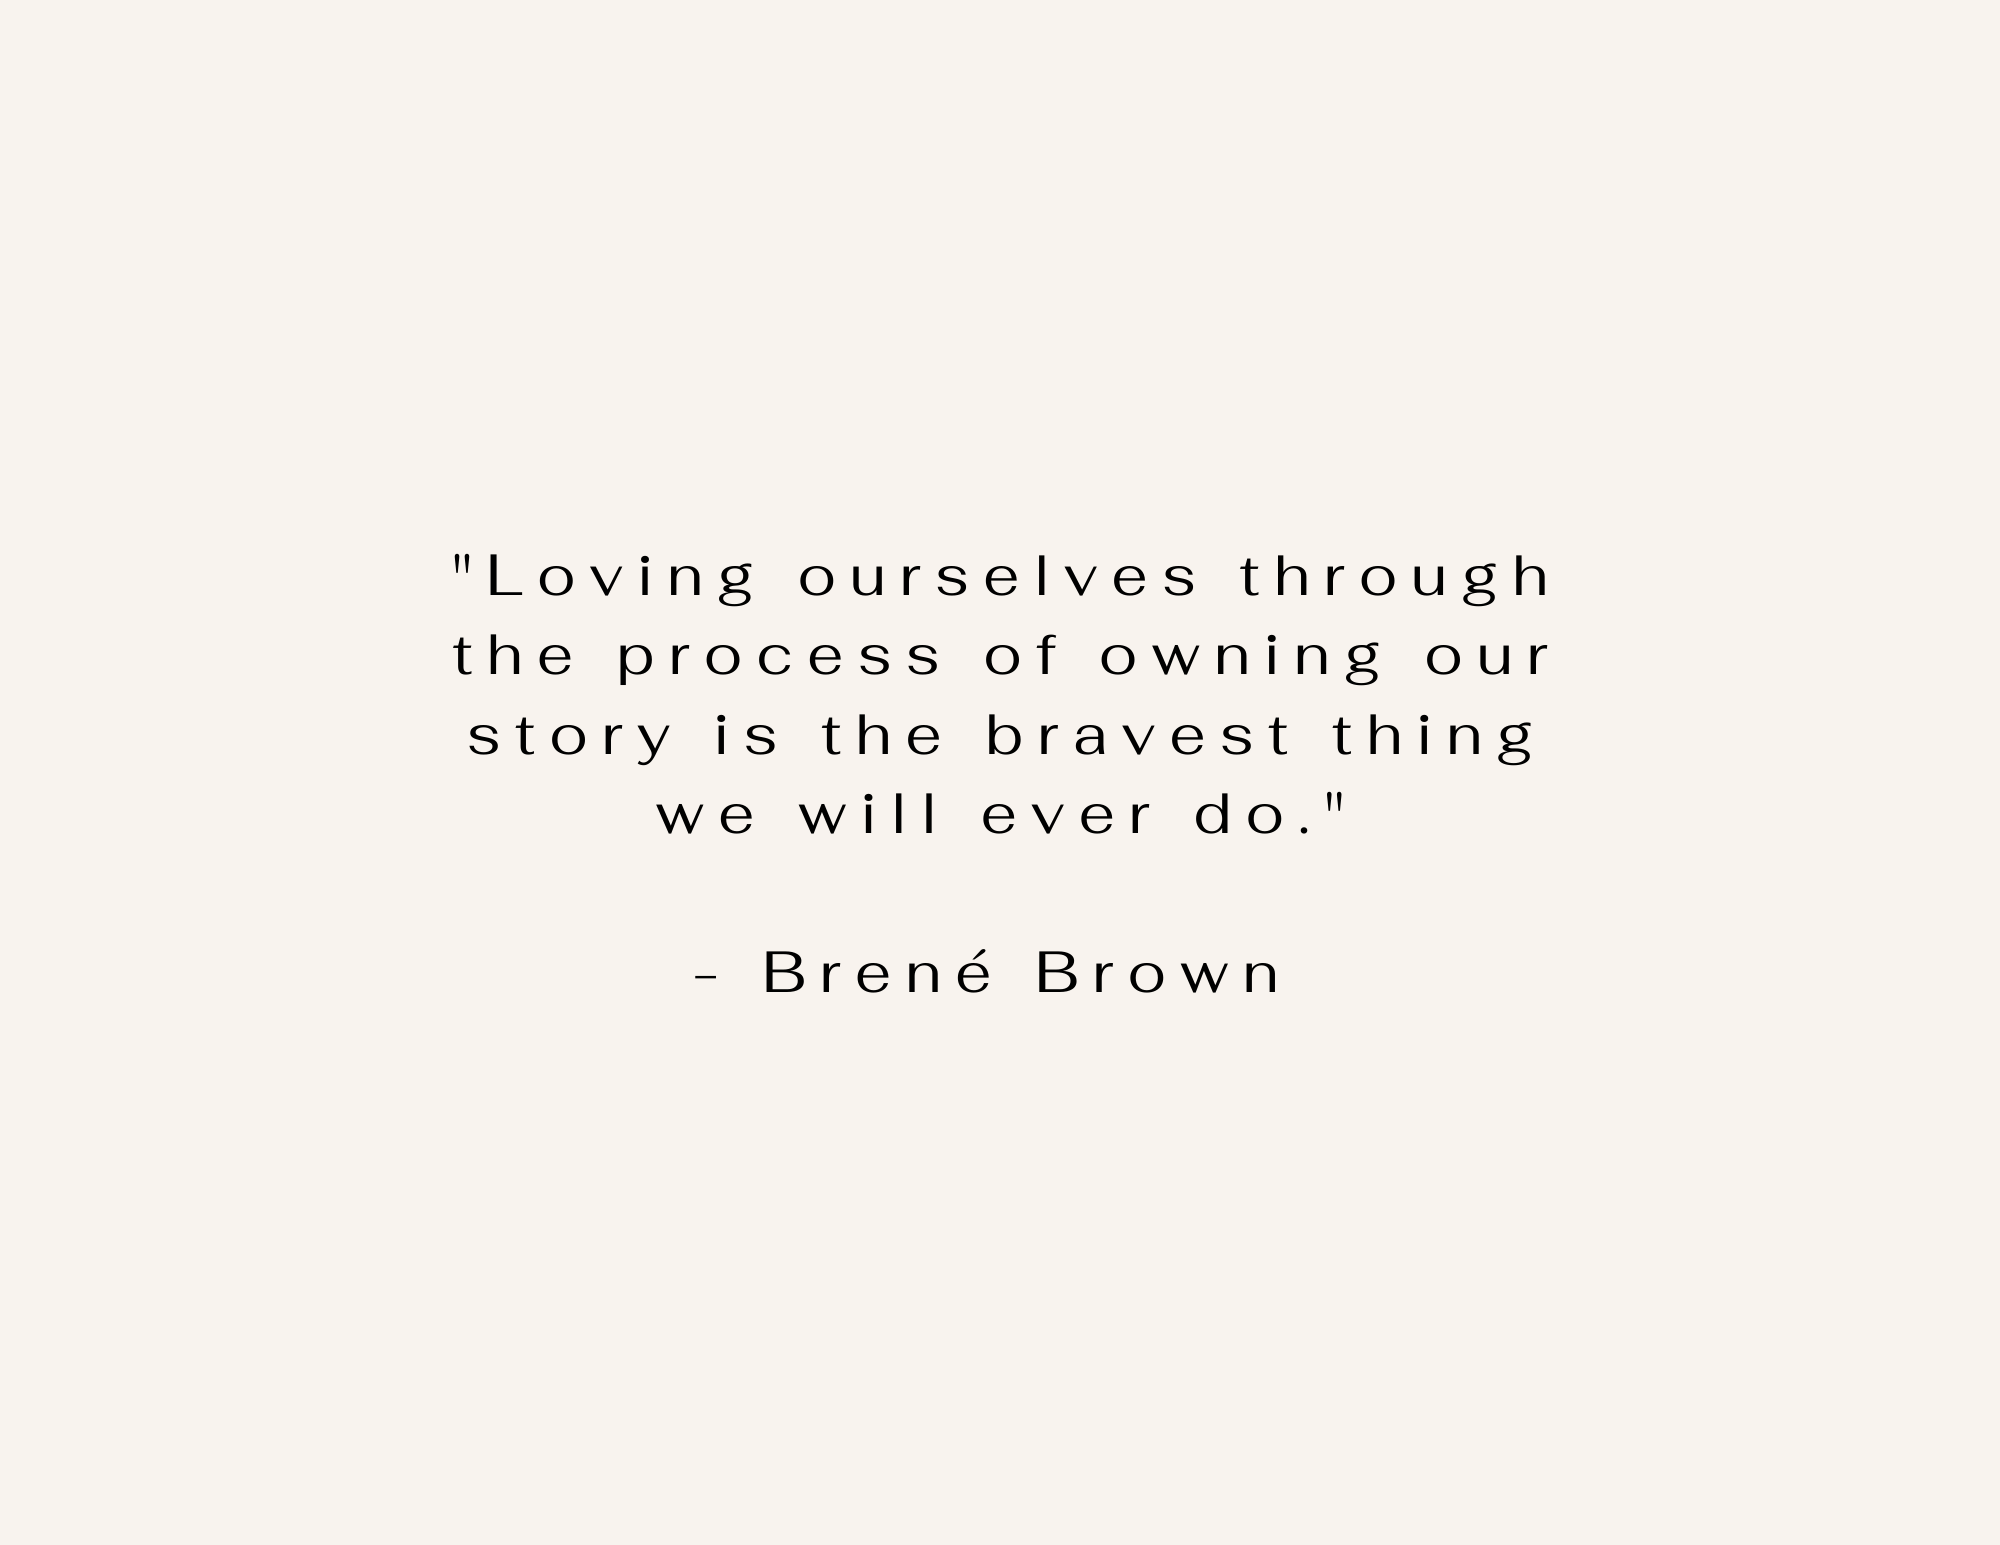 a quote from Brene Brown that reads "Loving ourselves through the process of owning our story is the bravest thing we will ever do. black writing on cream background